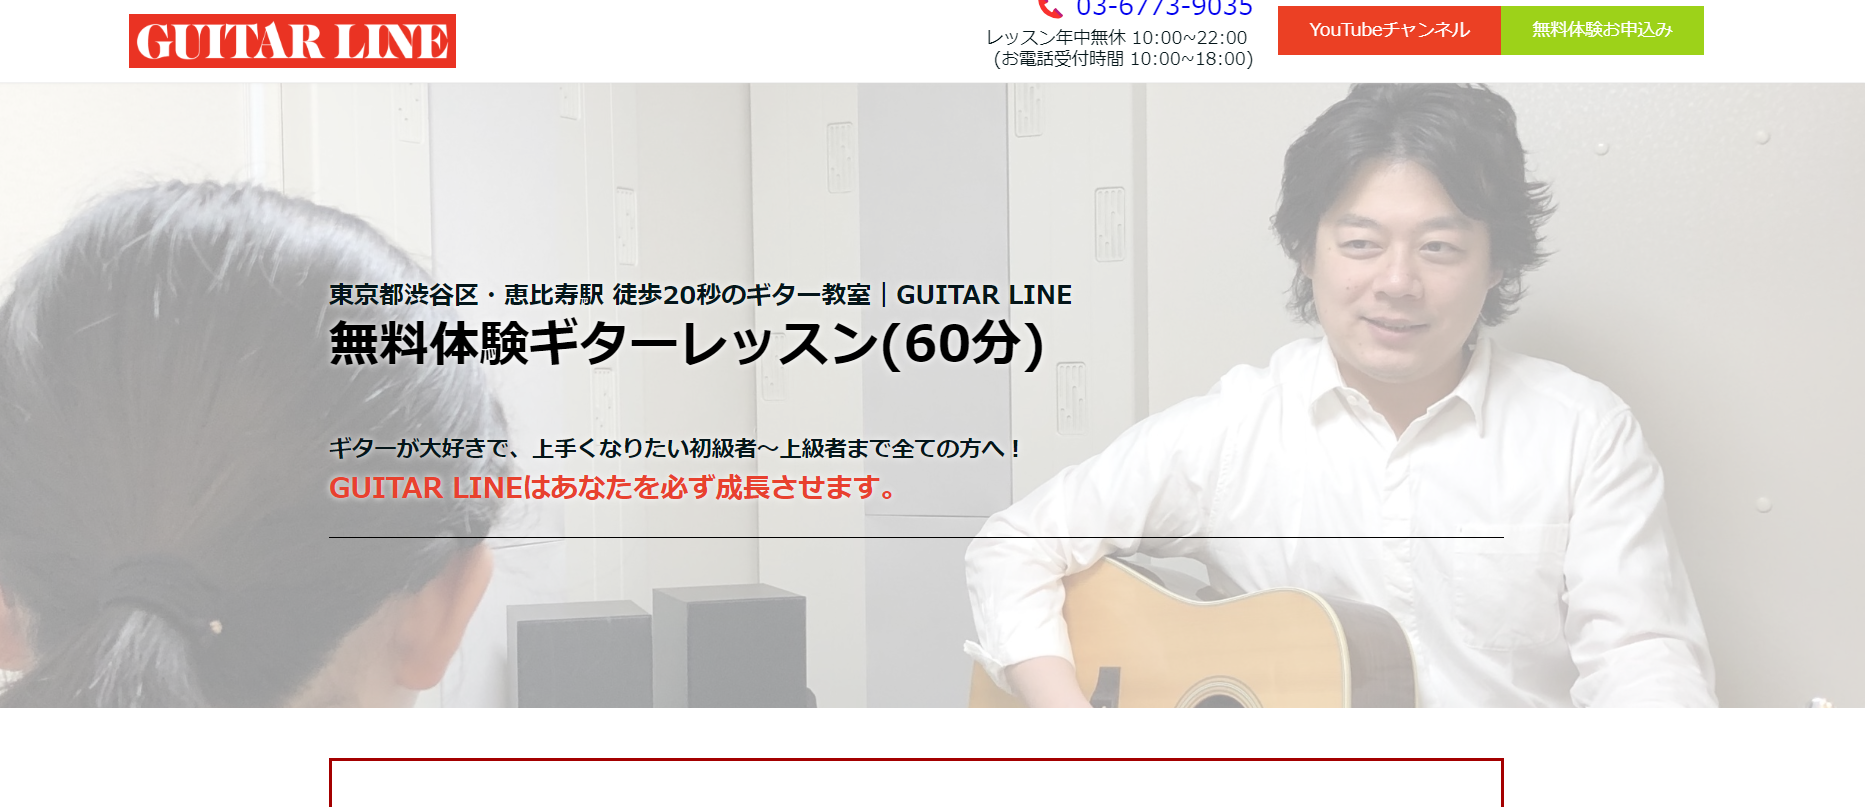 【GUITAR LINE（ギターライン）恵比寿】駅から20秒！通いやすい渋谷区のギター教室